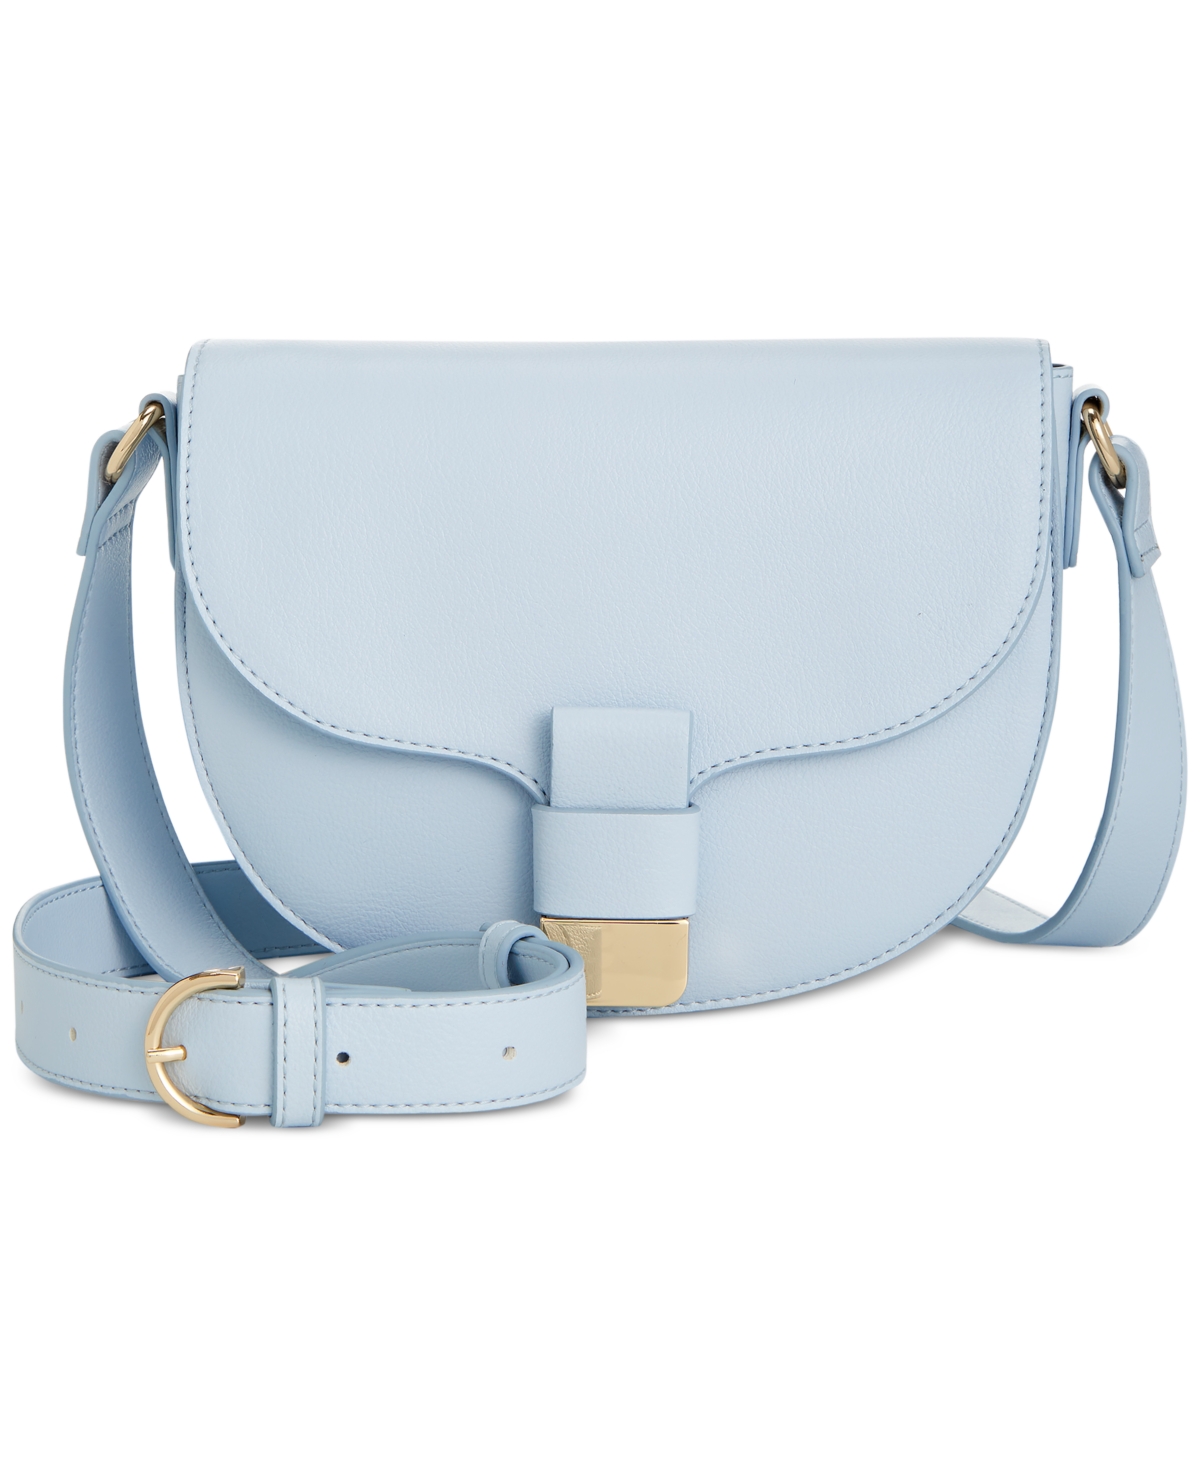 Holmme Saddle Crossbody, Created for Macy's - Skyway Blue